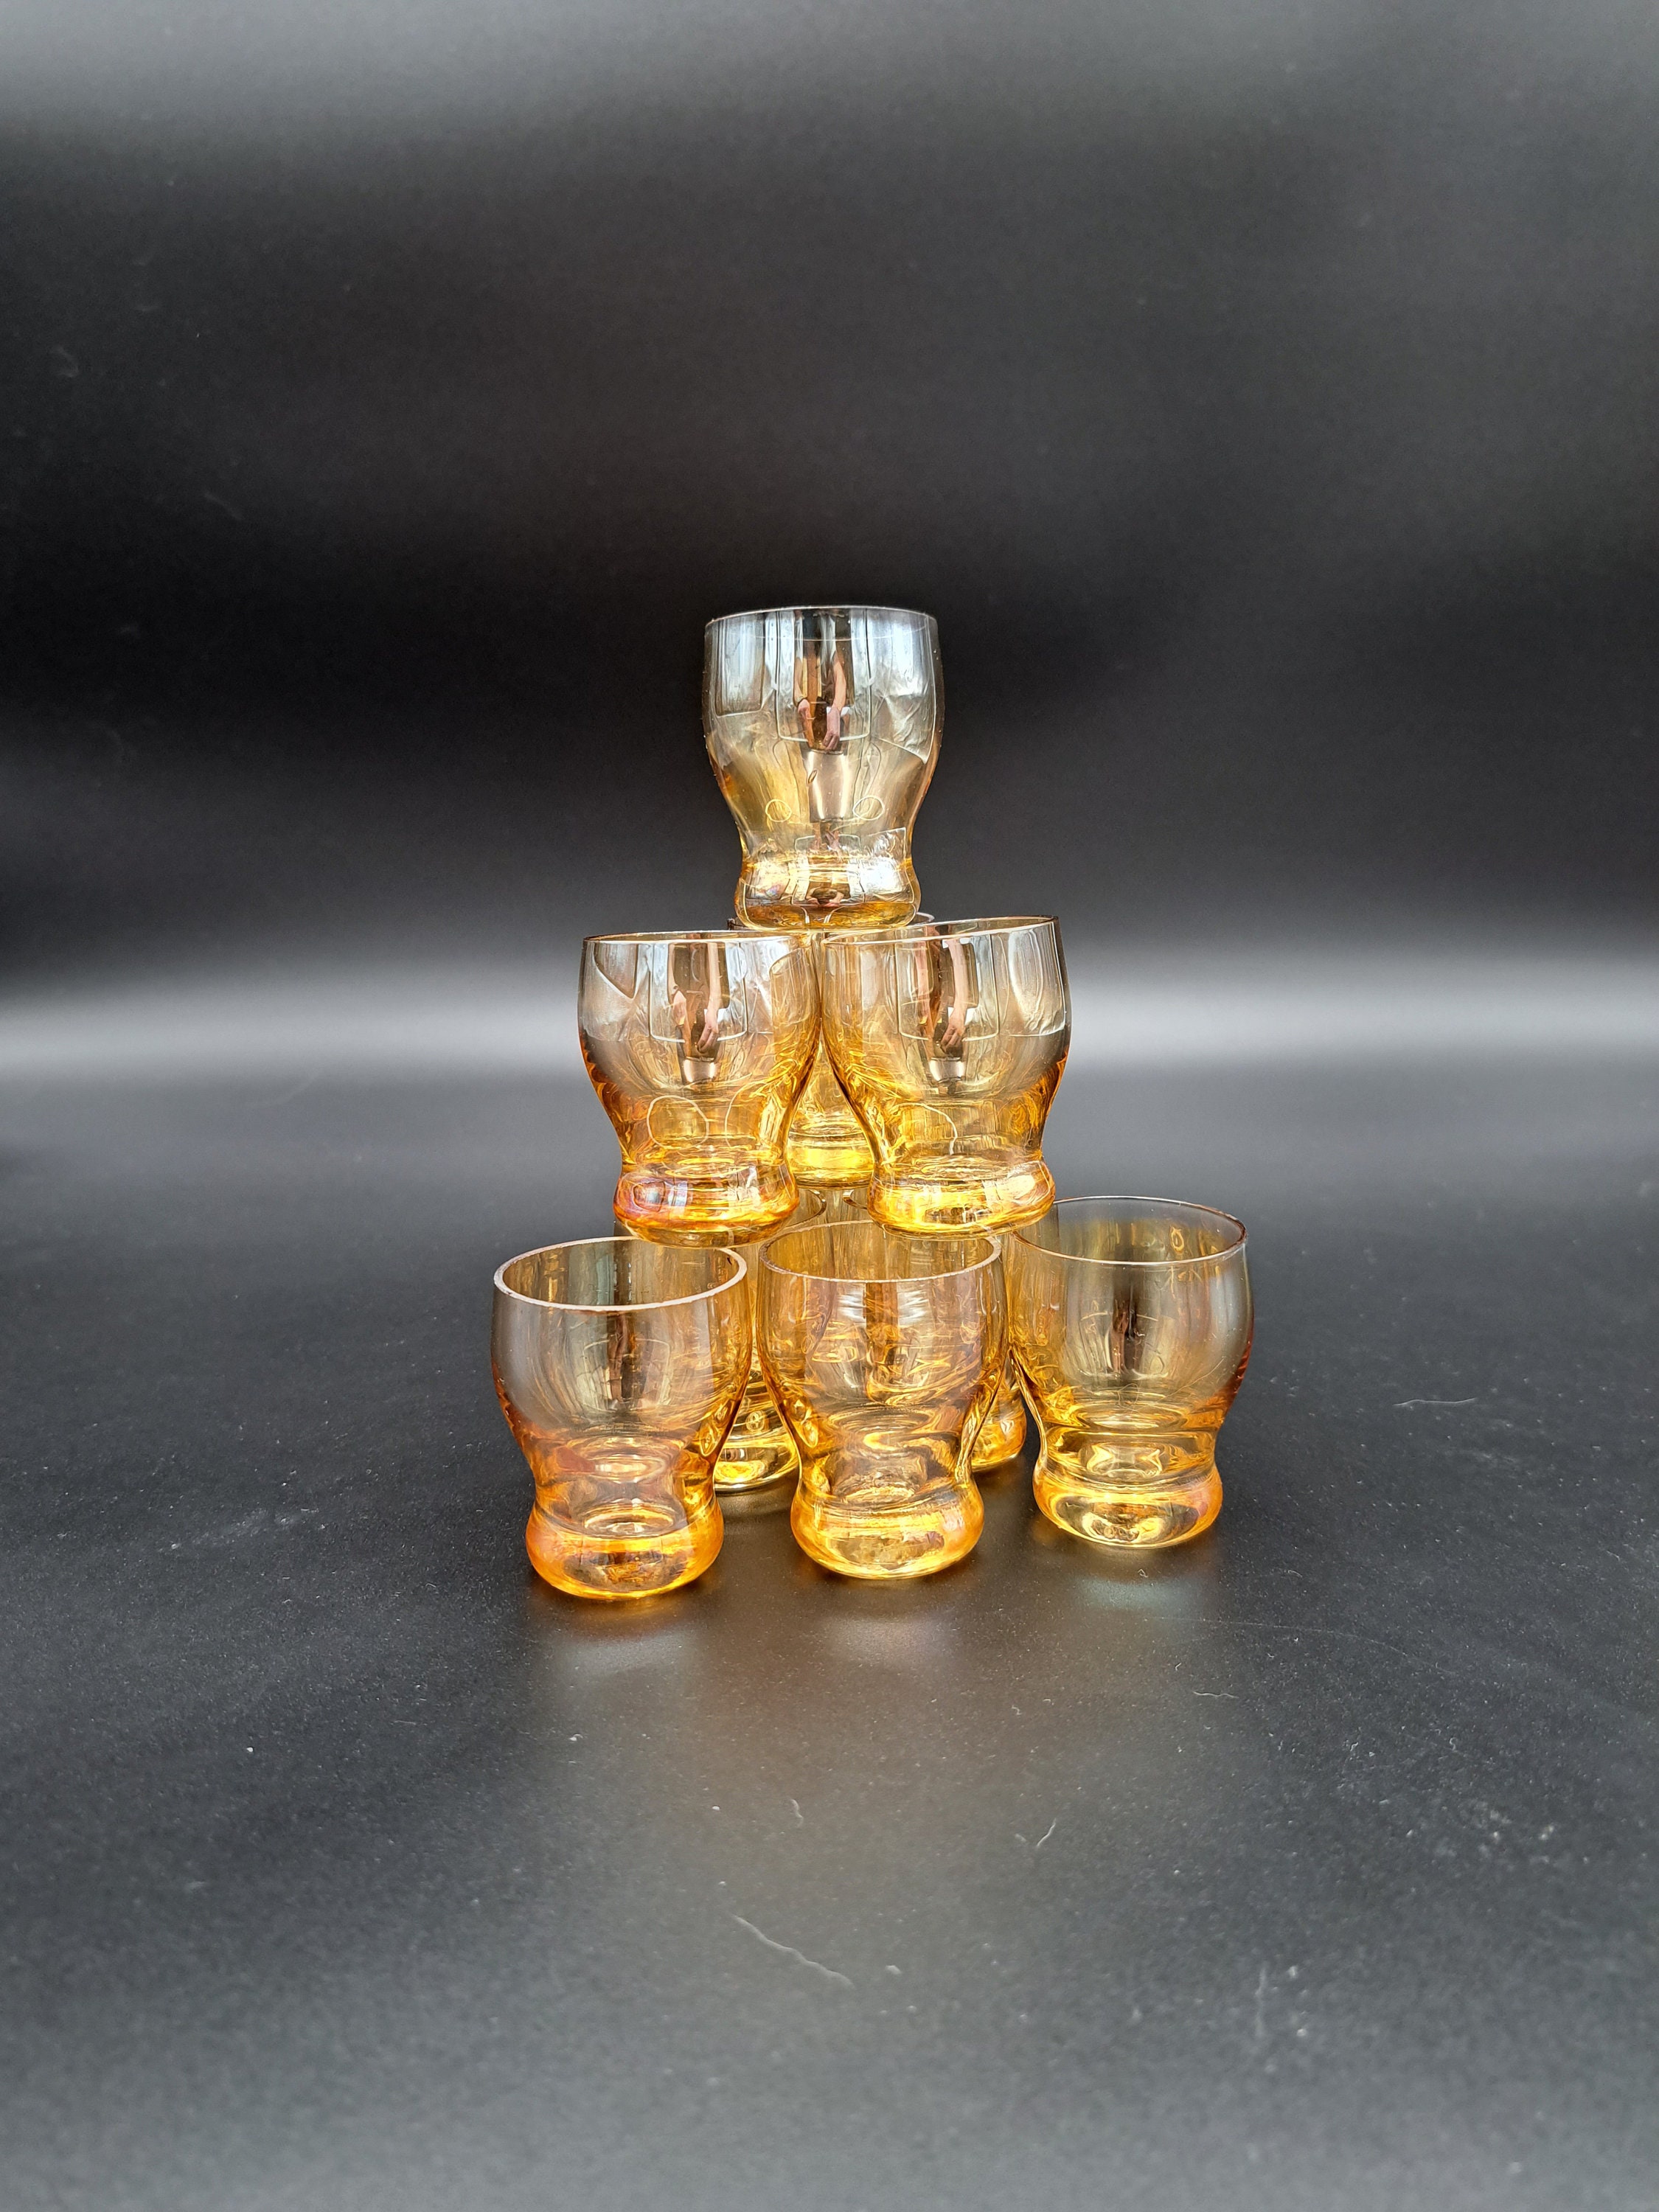 Cute Shot Glasses Mini Glass Snifters Cognac 1.7 oz Glasses  Brandy Snifter Mini Wine Glasses Glass Dinnerware Set for Whiskey Juice  Vodka Sherry Champagne Brandy Wine Party Supplies (12 Pieces): Snifters